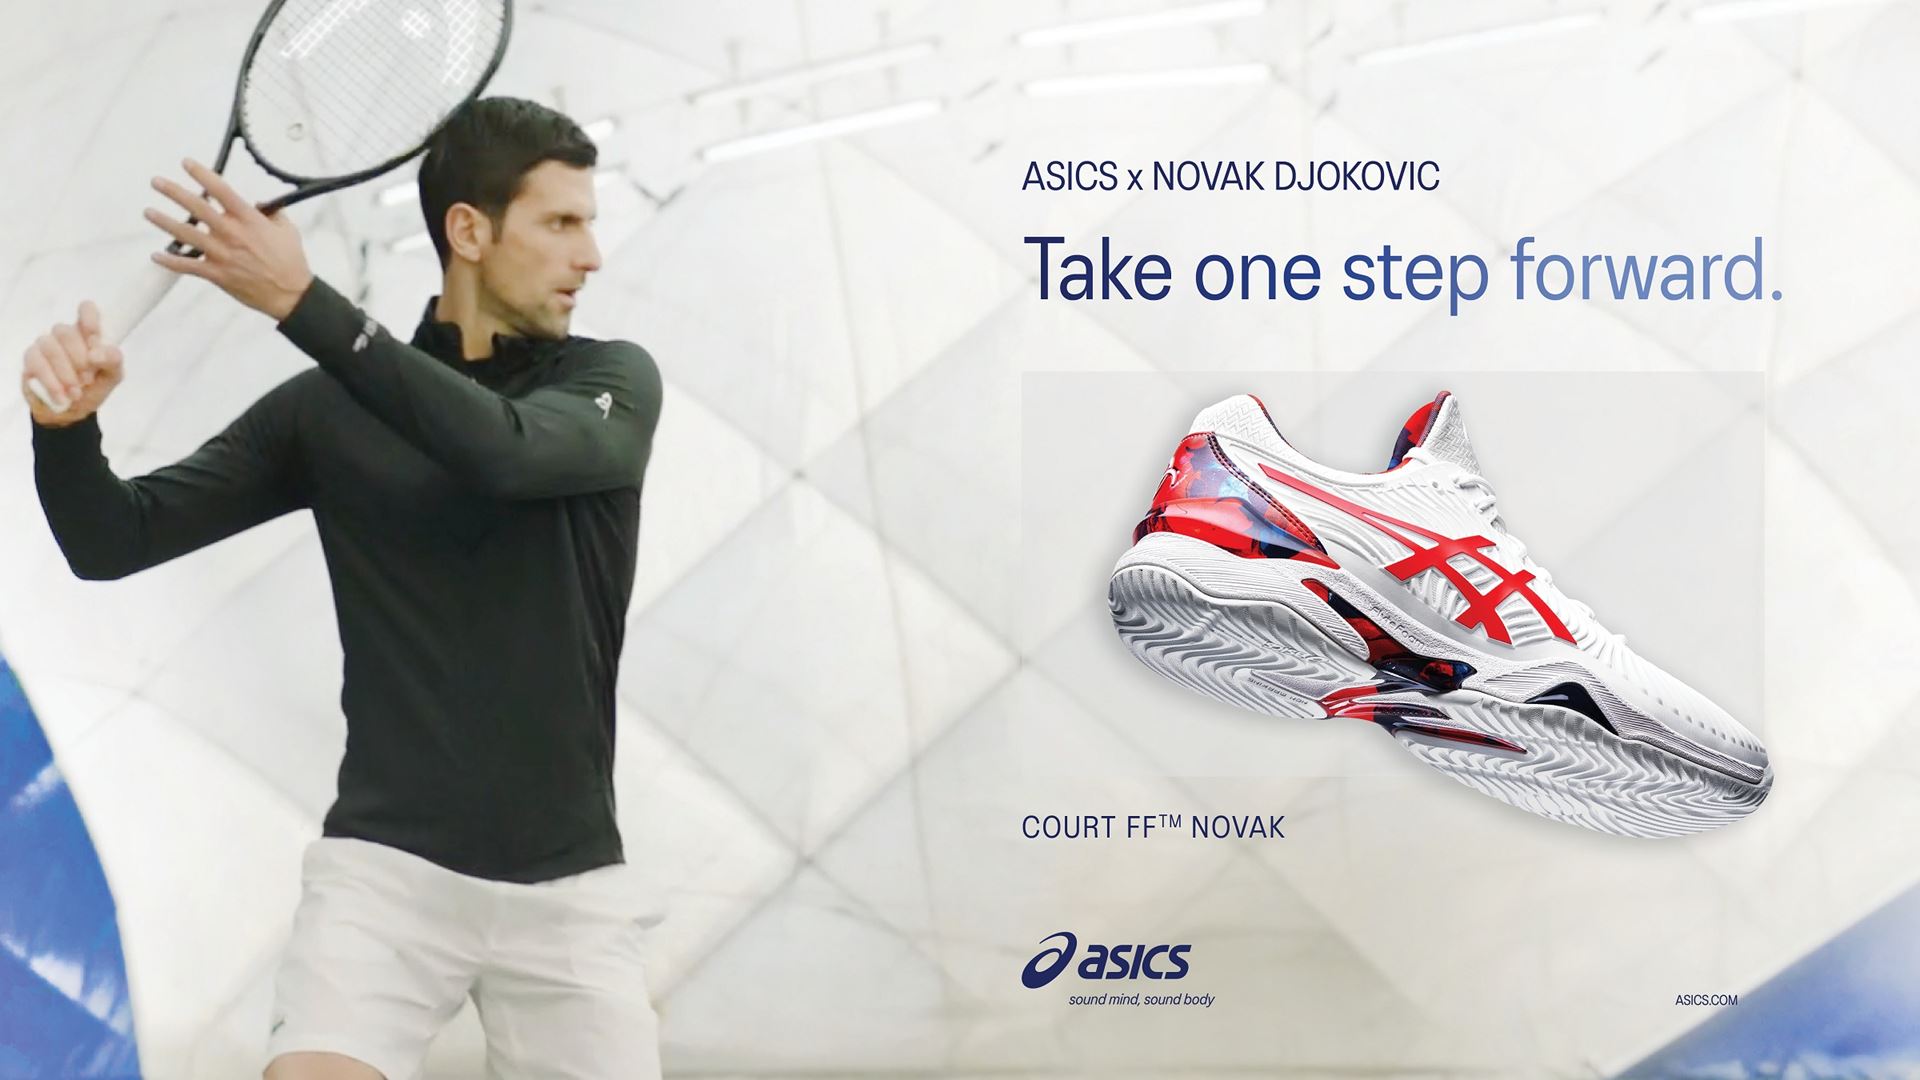 ASICS and Novak Djokovic call on players to propel body and mind forward